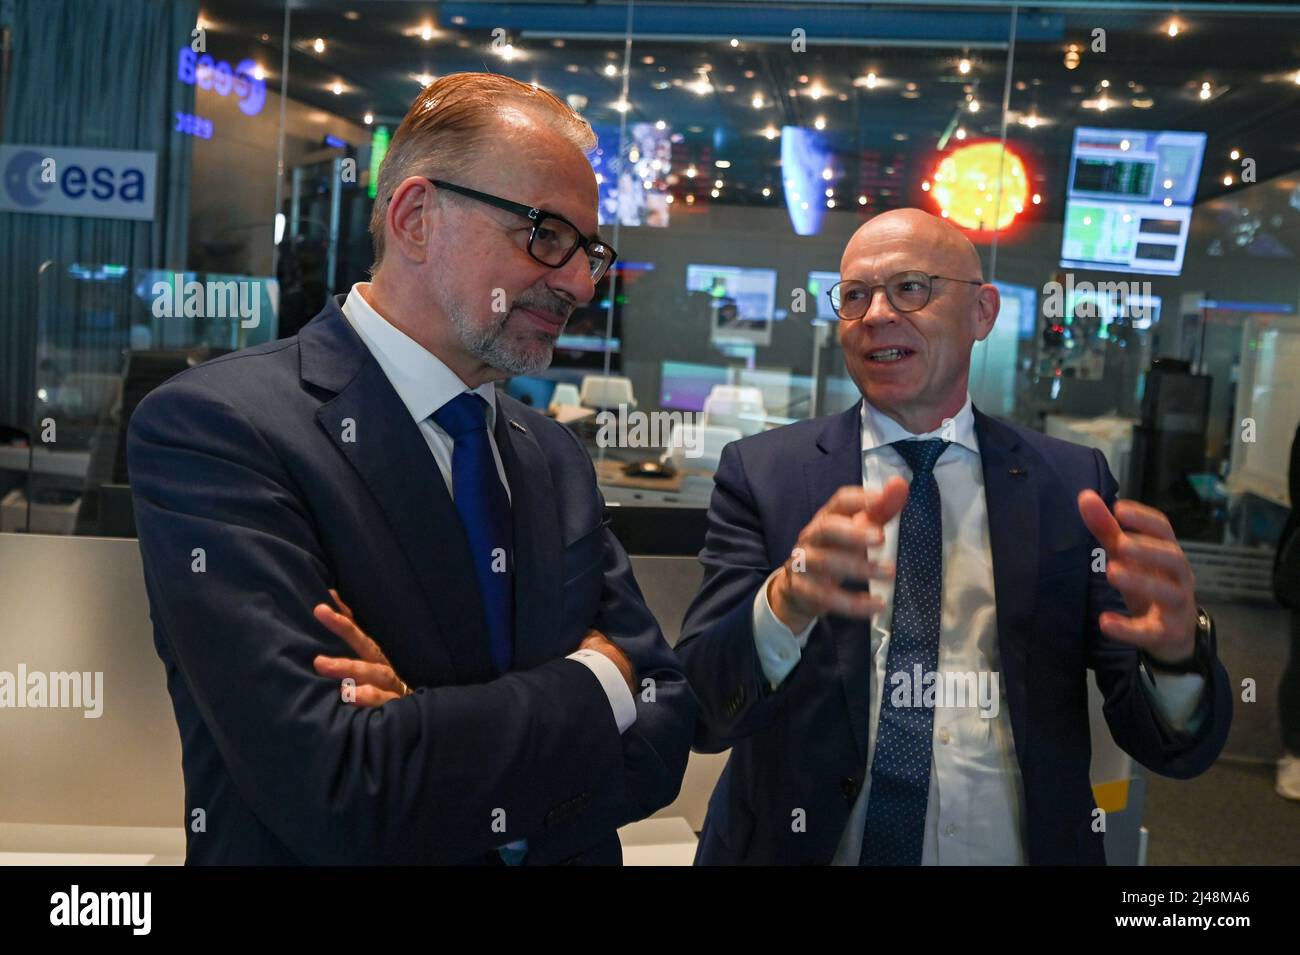 Darmstadt, Germany. 12th Apr, 2022. Josef Aschbacher (l), Director General of the European Space Agency ESA, and Rolf Densing, Director of Mission Operations of the European Space Agency ESA and Head of the Space Operations Center ESOC, talk to each other at the European Satellite Operations Center ESOC in Darmstadt. Credit: Arne Dedert/dpa/Alamy Live News Stock Photo